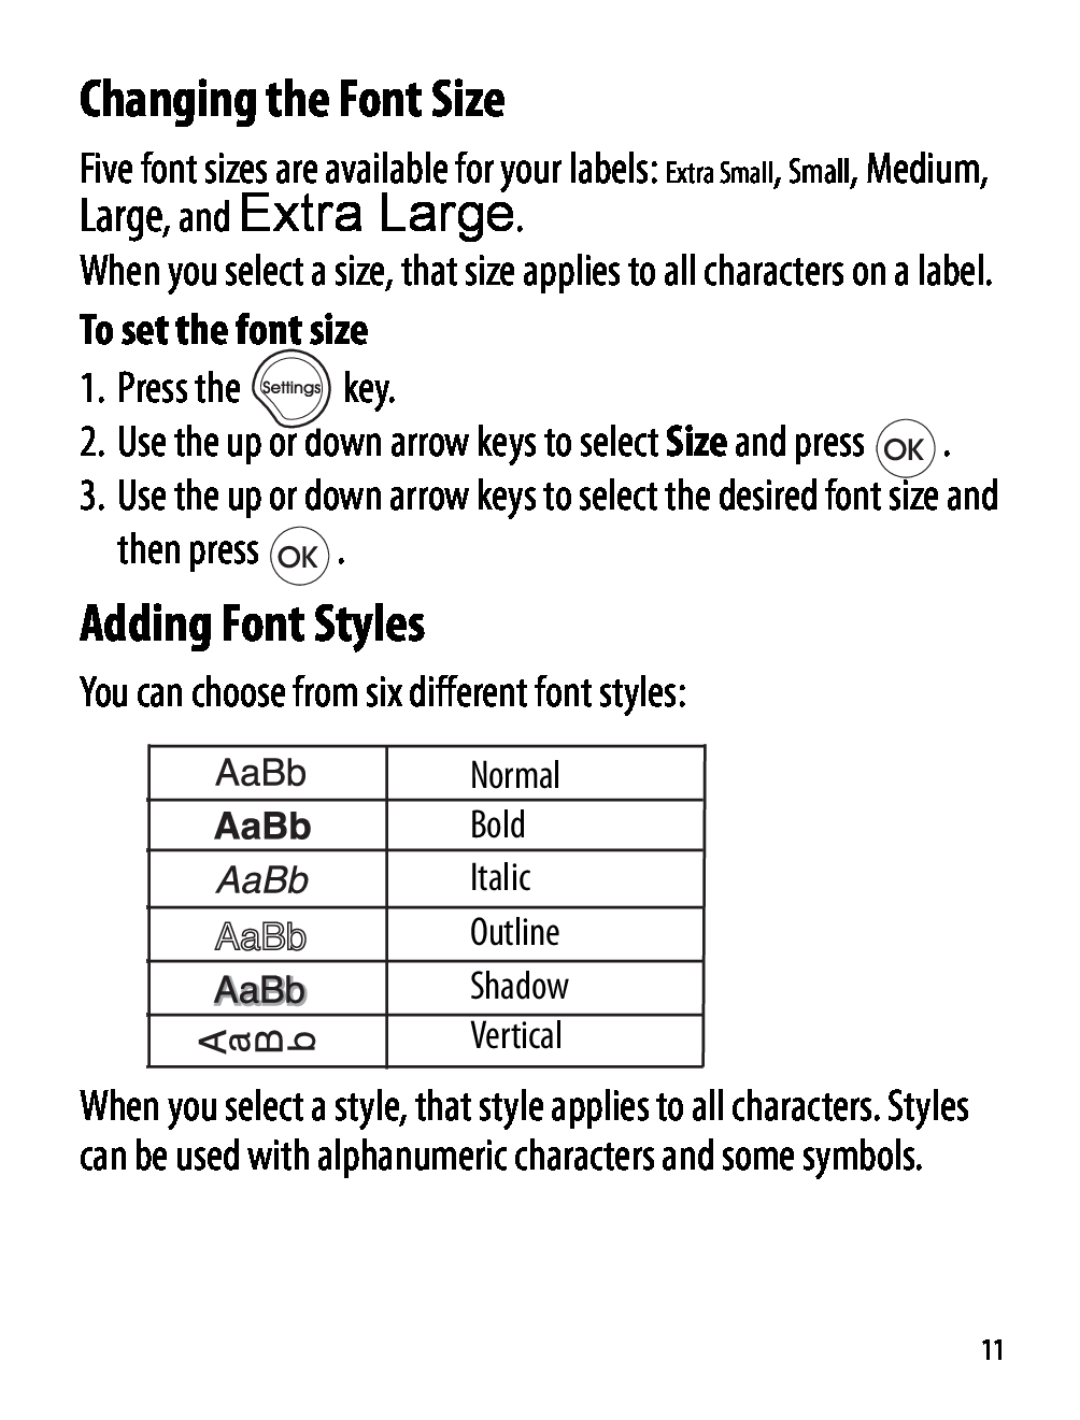 Dymo Labelmaker manual Changing the Font Size, Adding Font Styles, To set the font size, Press the key, then press 